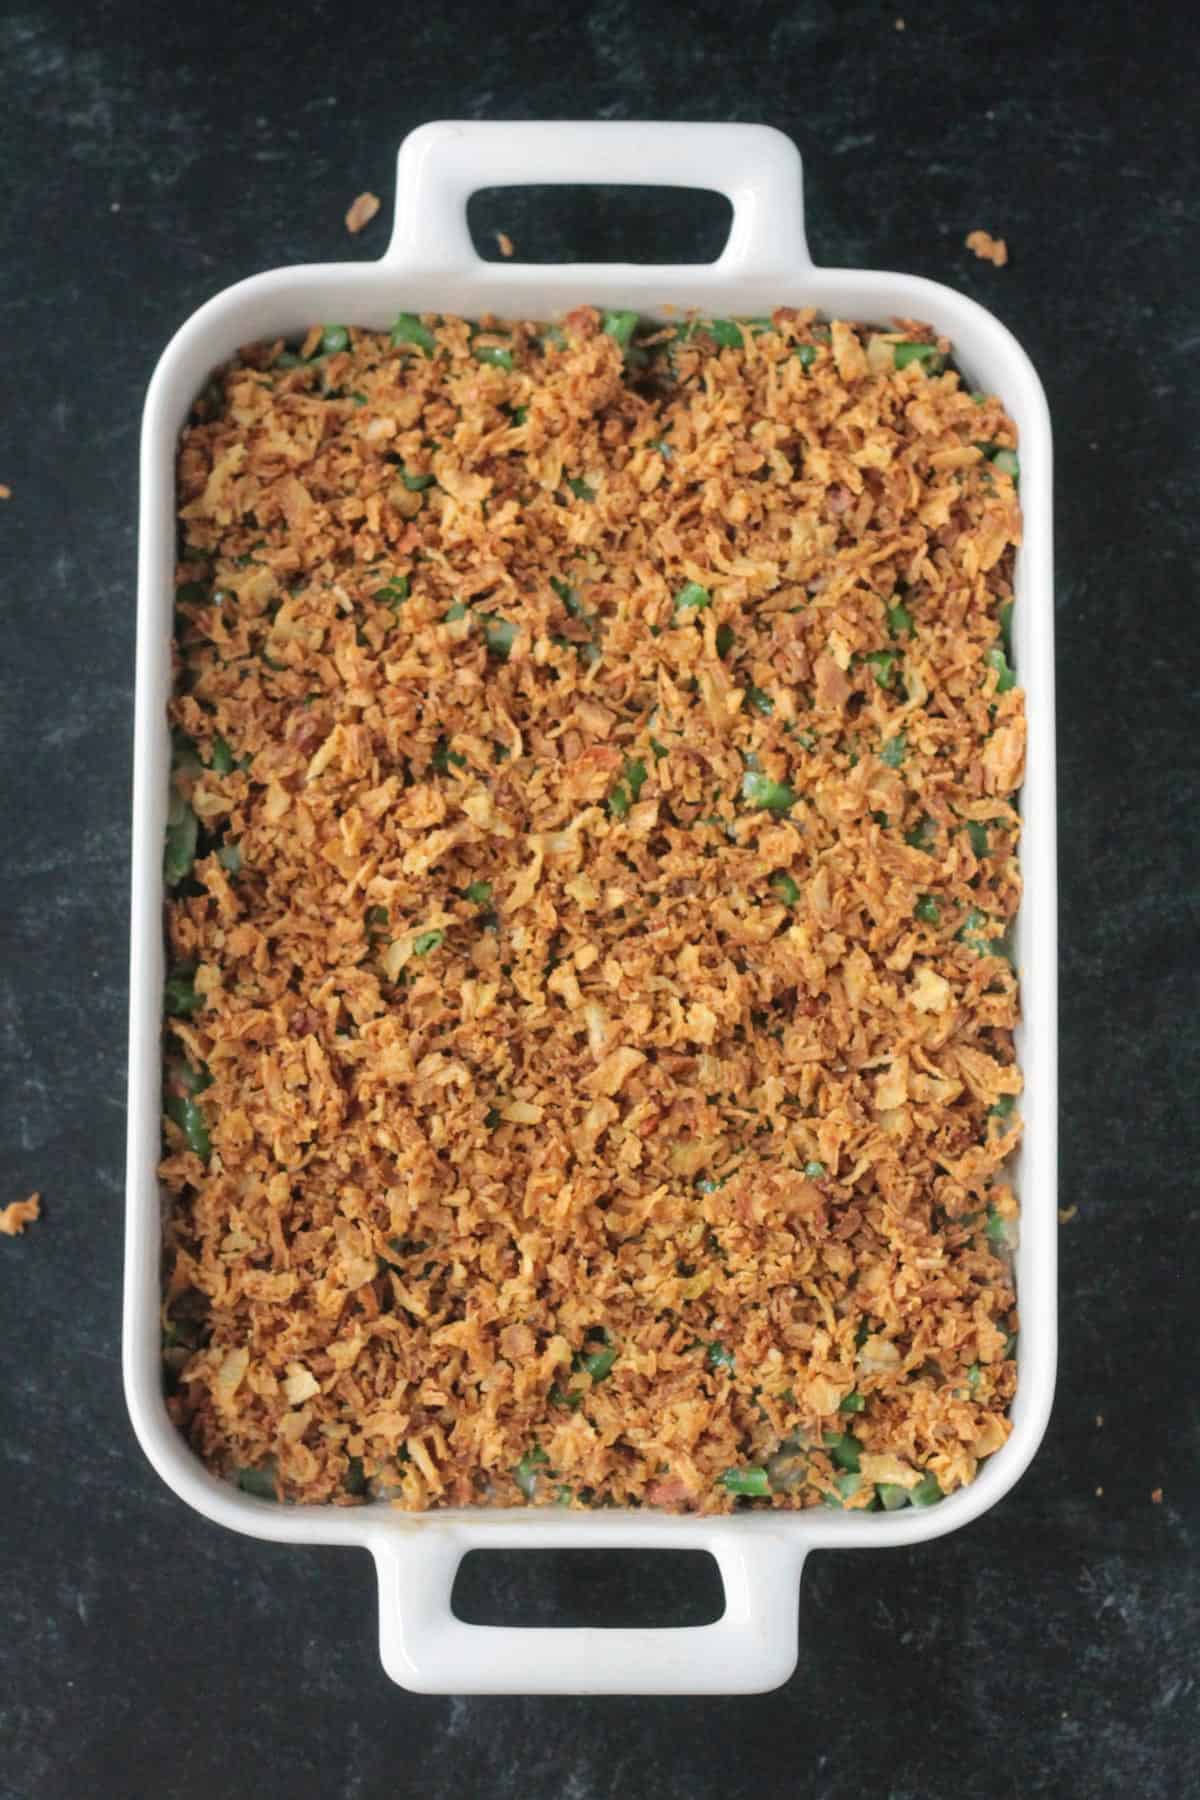 Crunch french onions covering the top of the recipe in a baking pan.